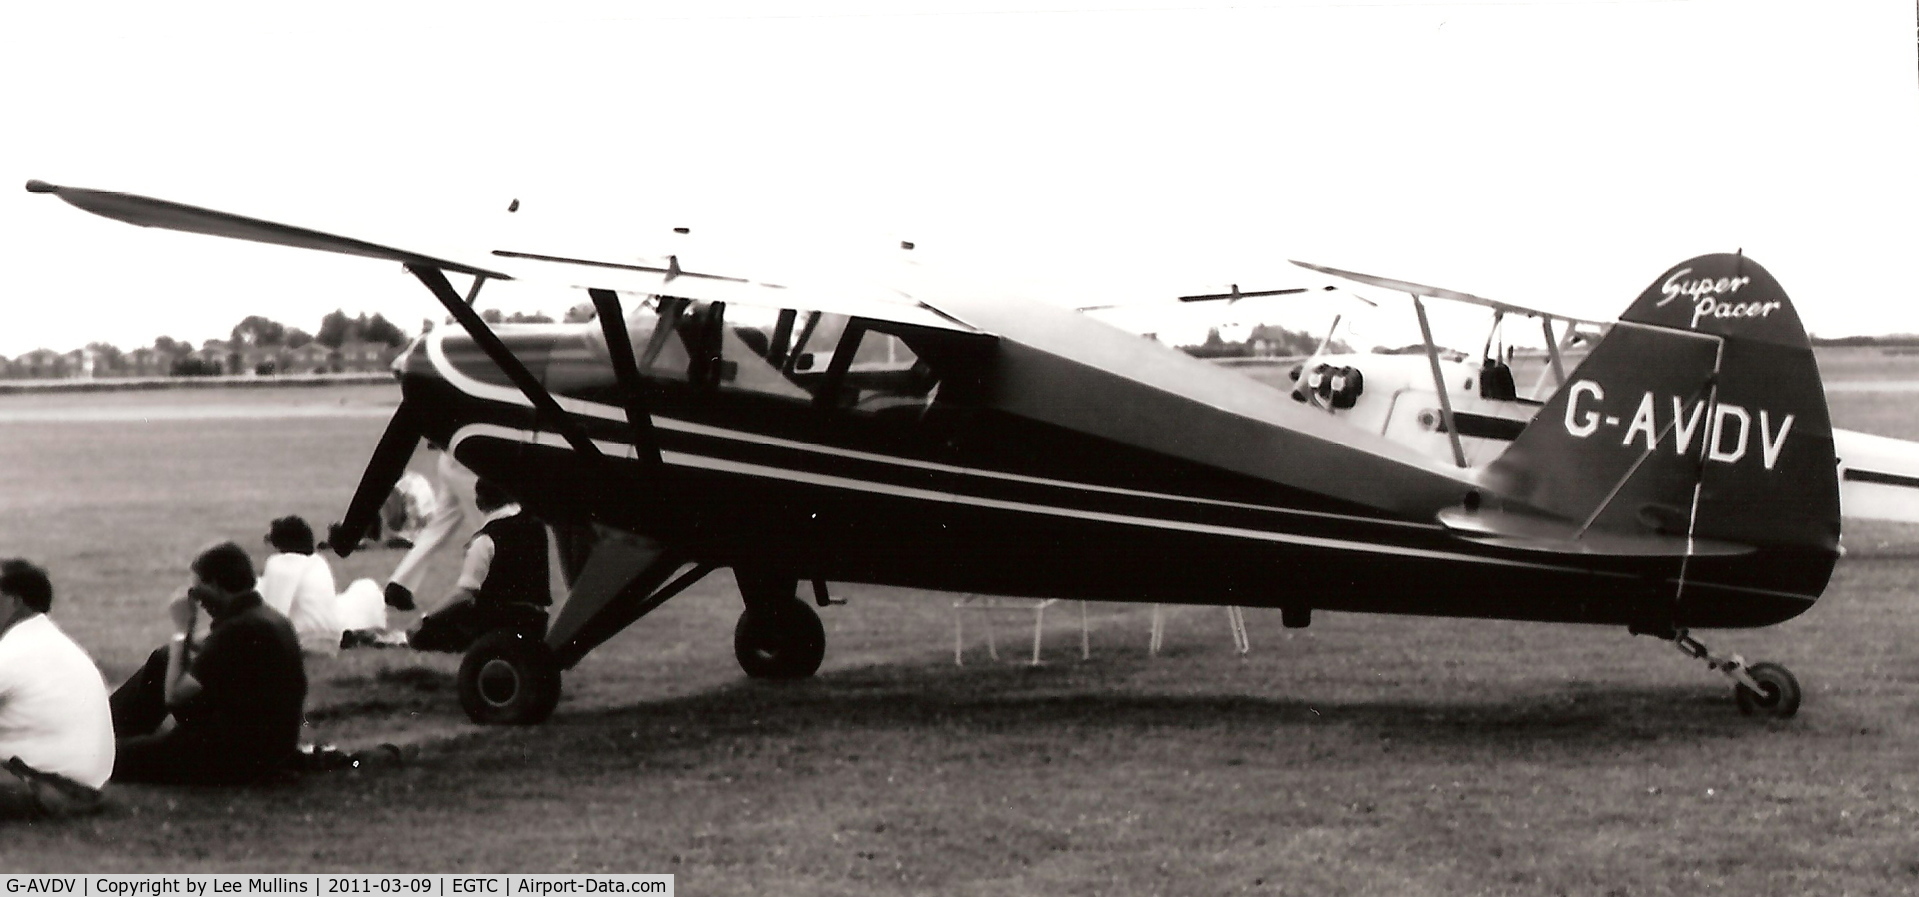 G-AVDV, 1956 Piper PA-22-150 Tri-Pacer C/N 22-3752, Piper Tri-Pacer, converted to a taildragger. Seen here at a PFA Rally at Cranfield in the 1980's.